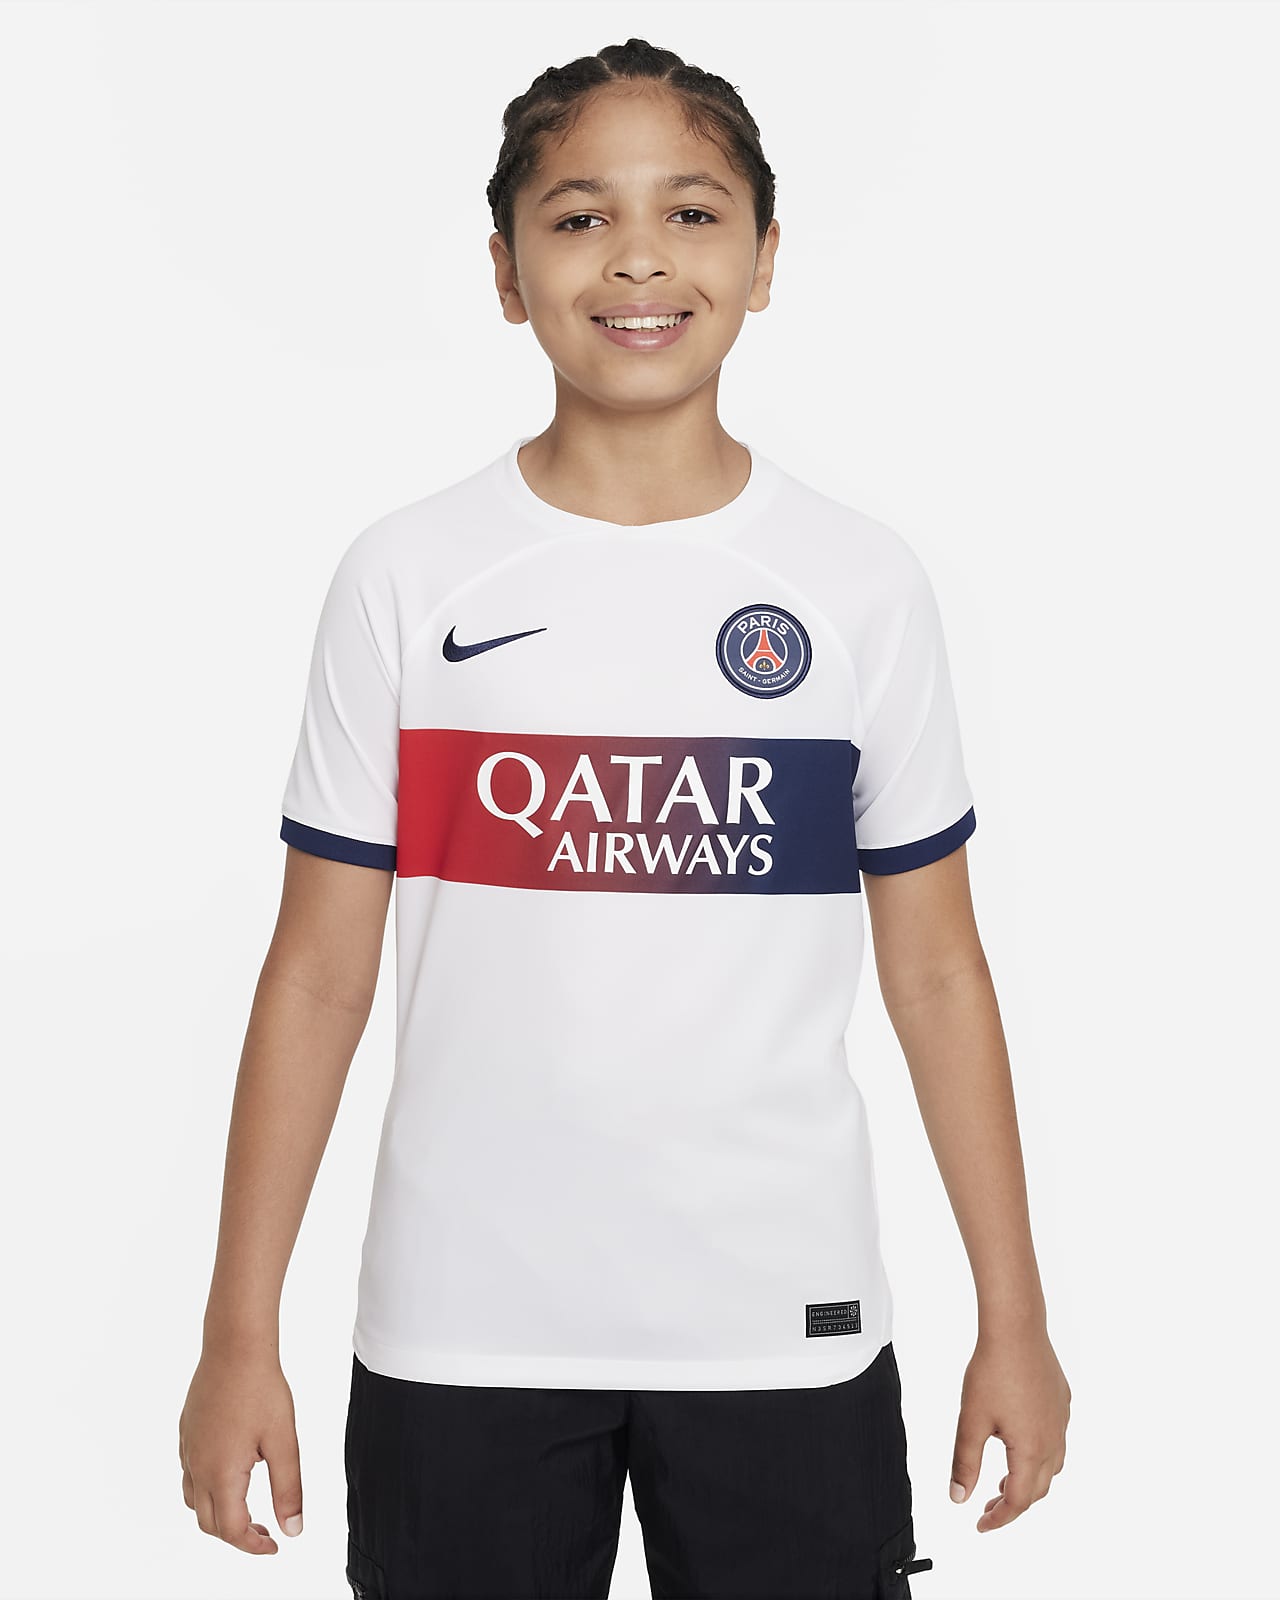 Paris Saint-Germain Gifts & Accessories, PSG Gifts & Accessories